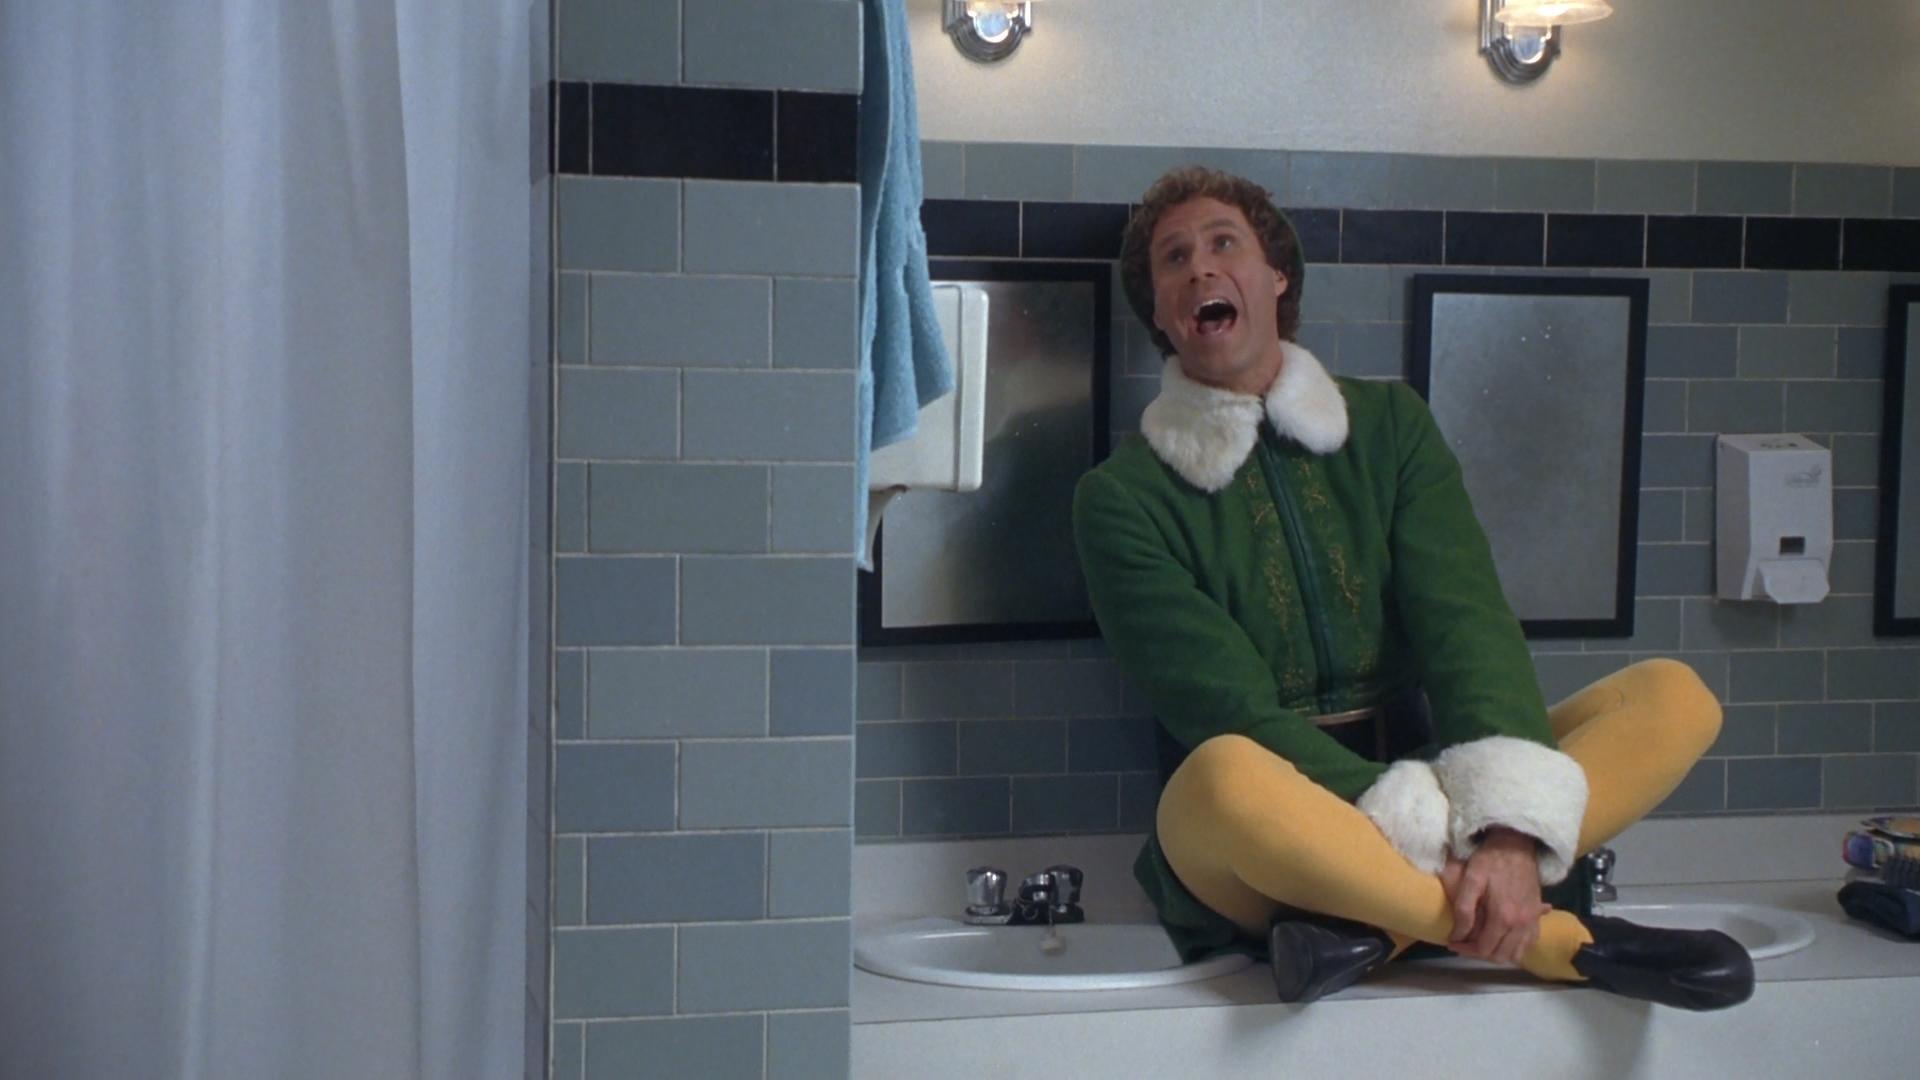 Buddy the elf excited gif